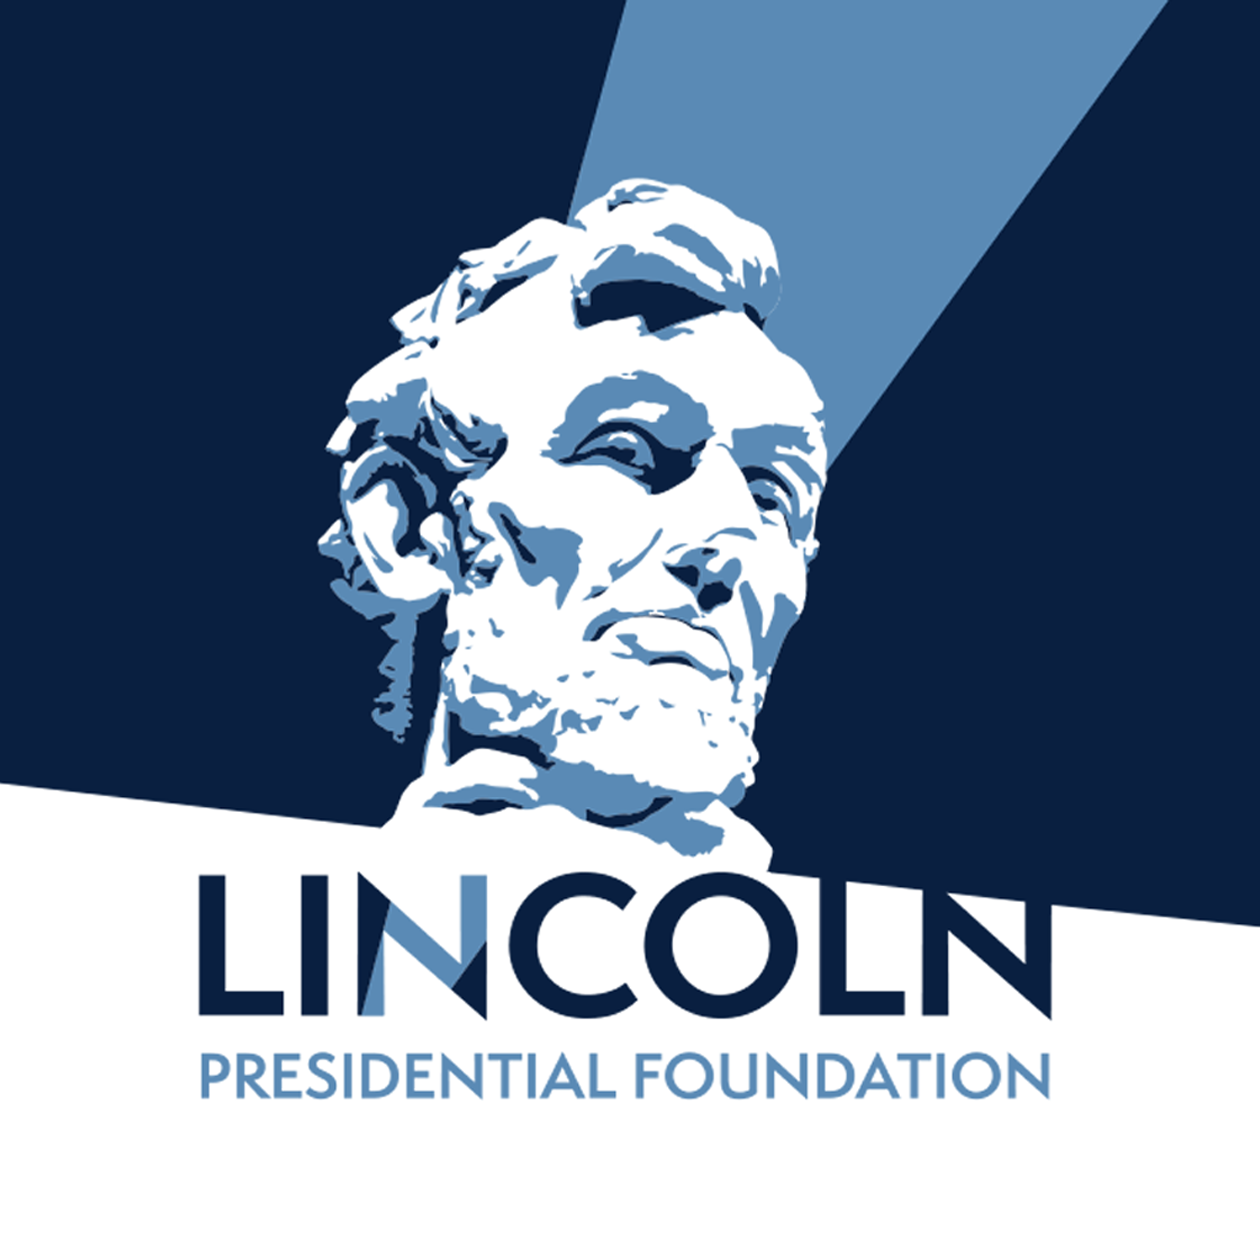 Lincoln Presidential Foundation